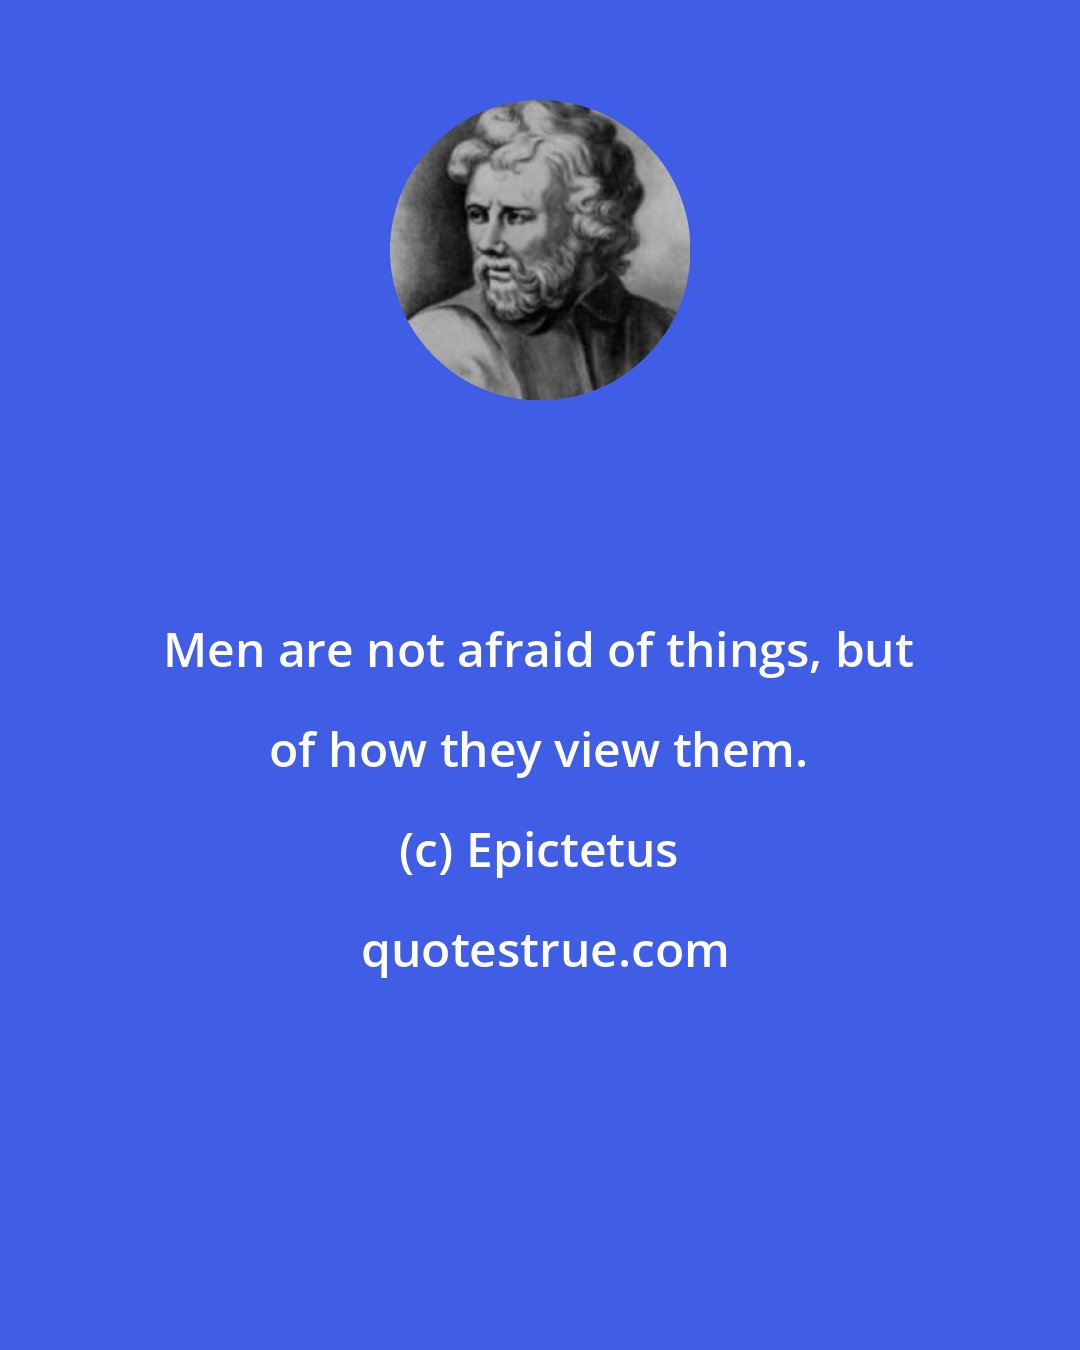 Epictetus: Men are not afraid of things, but of how they view them.